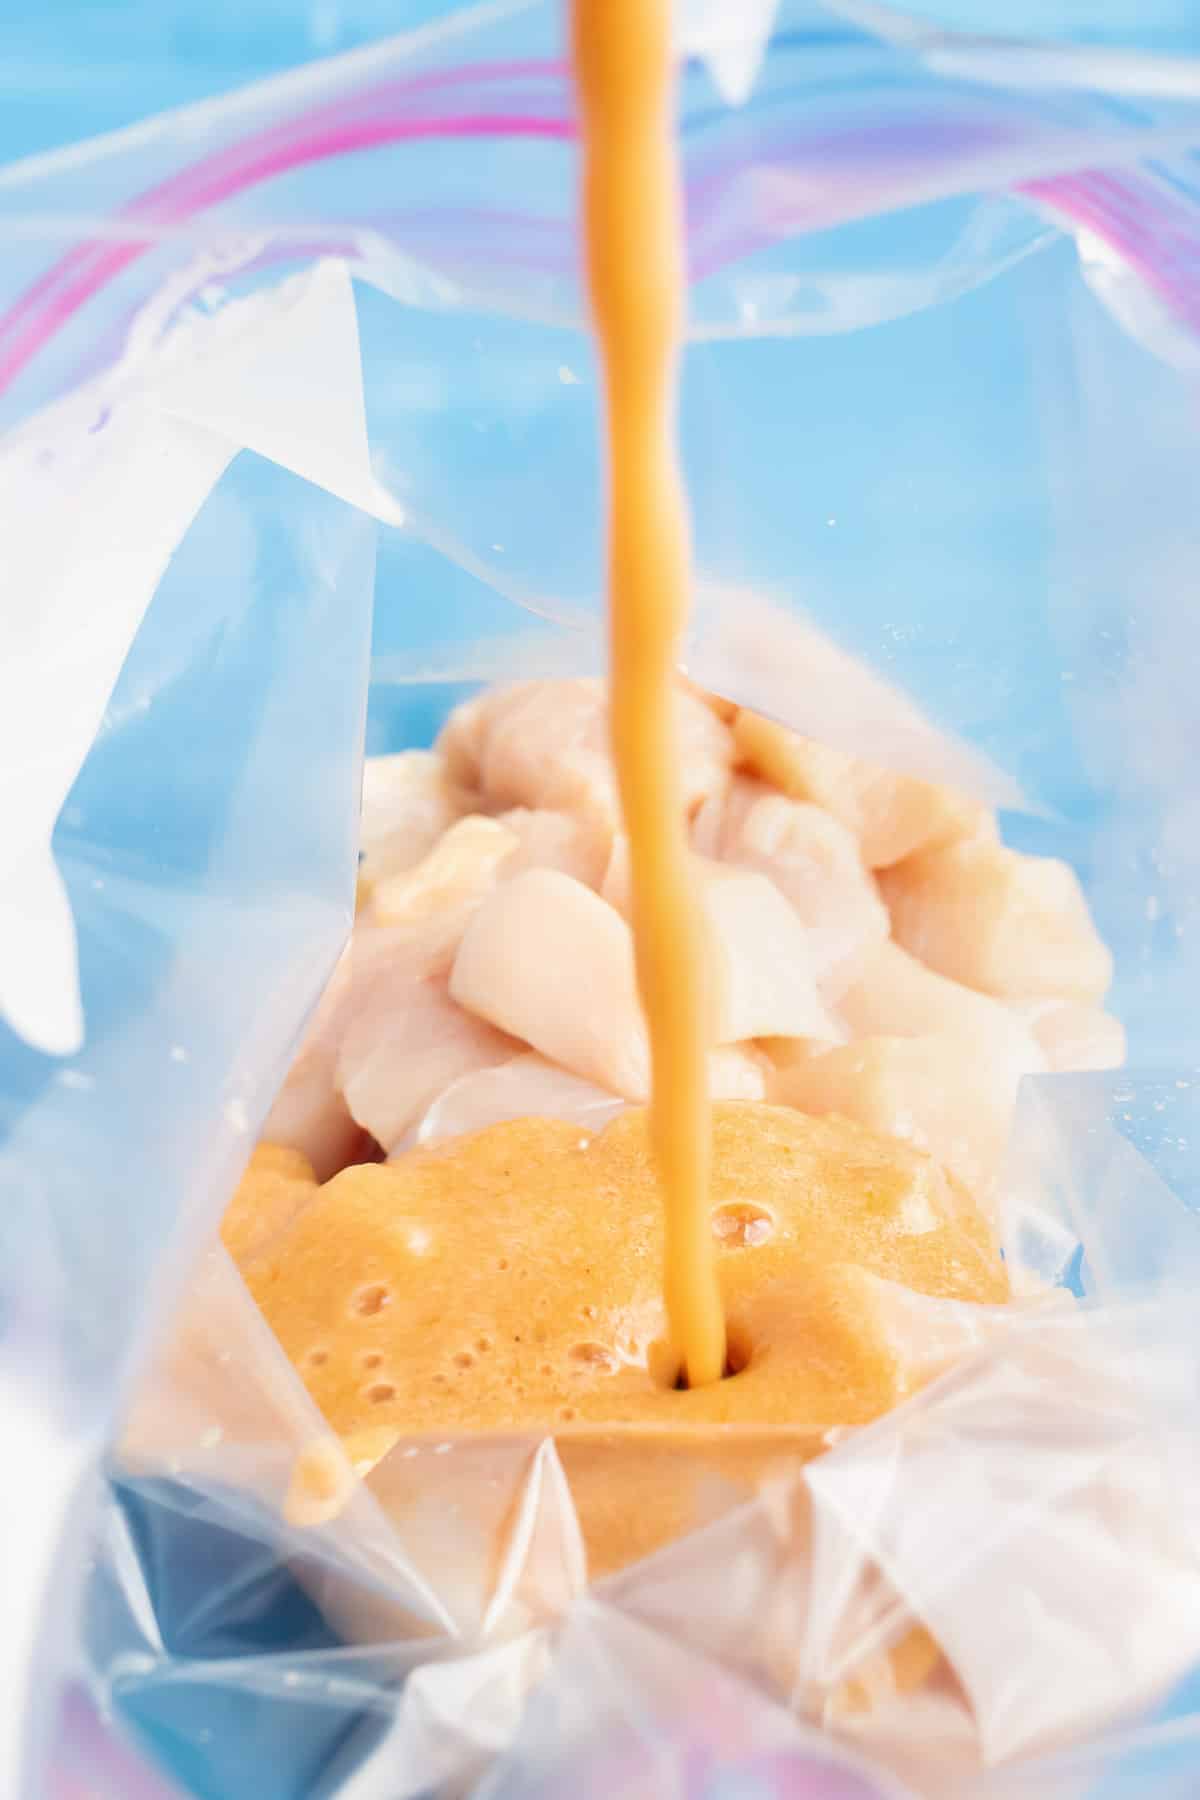 Marinade is poured over chicken in a bag.